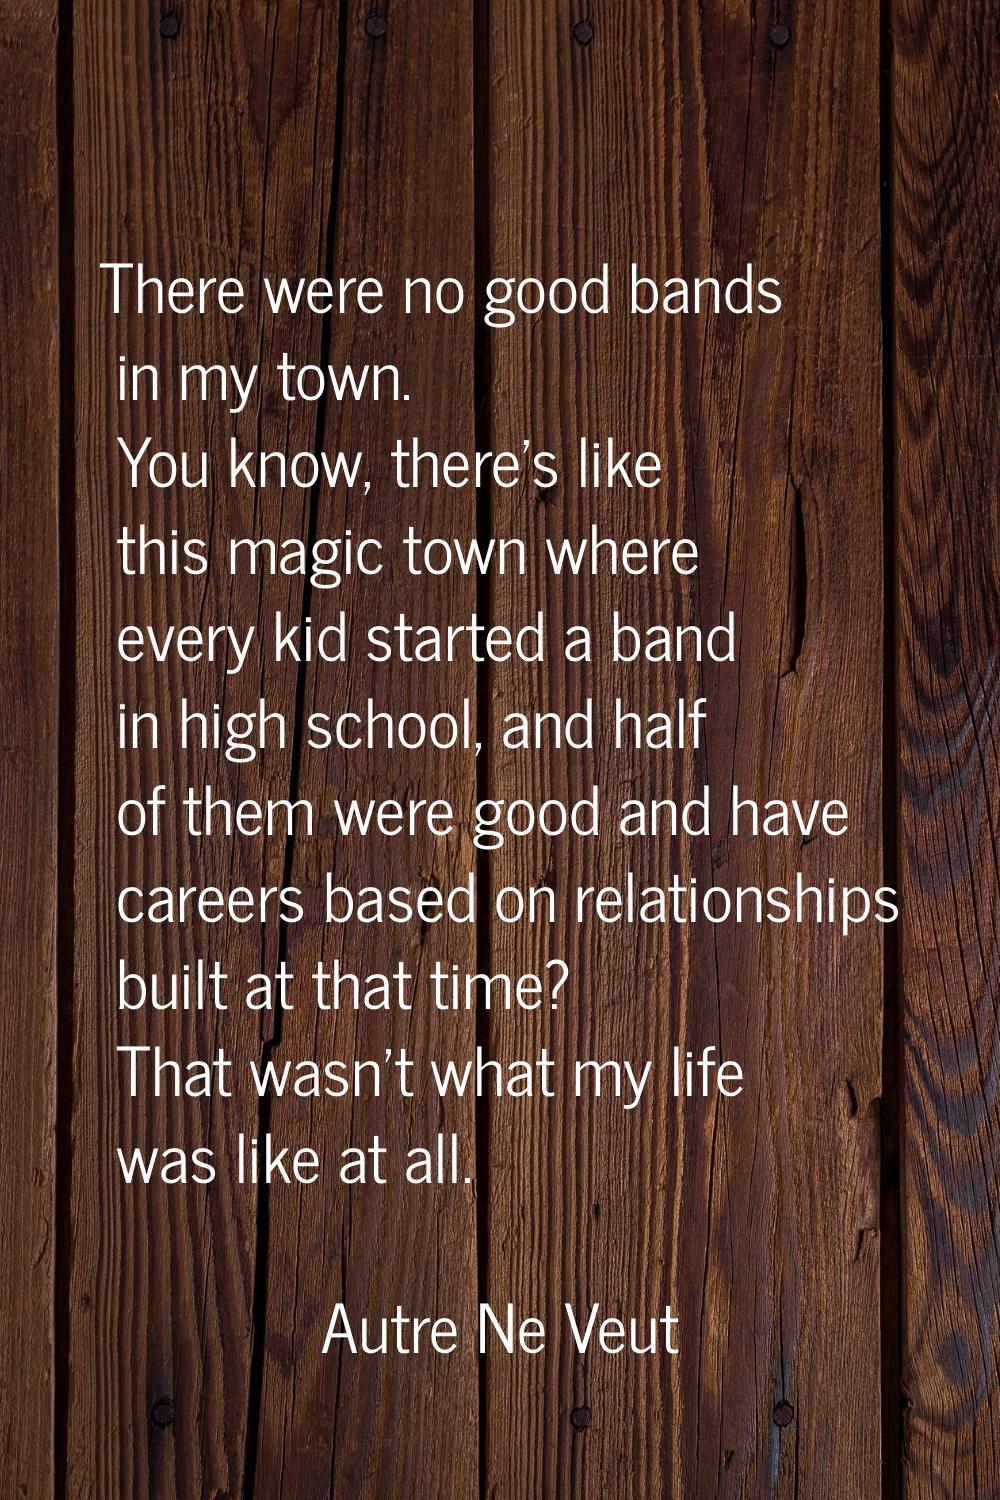 There were no good bands in my town. You know, there's like this magic town where every kid started